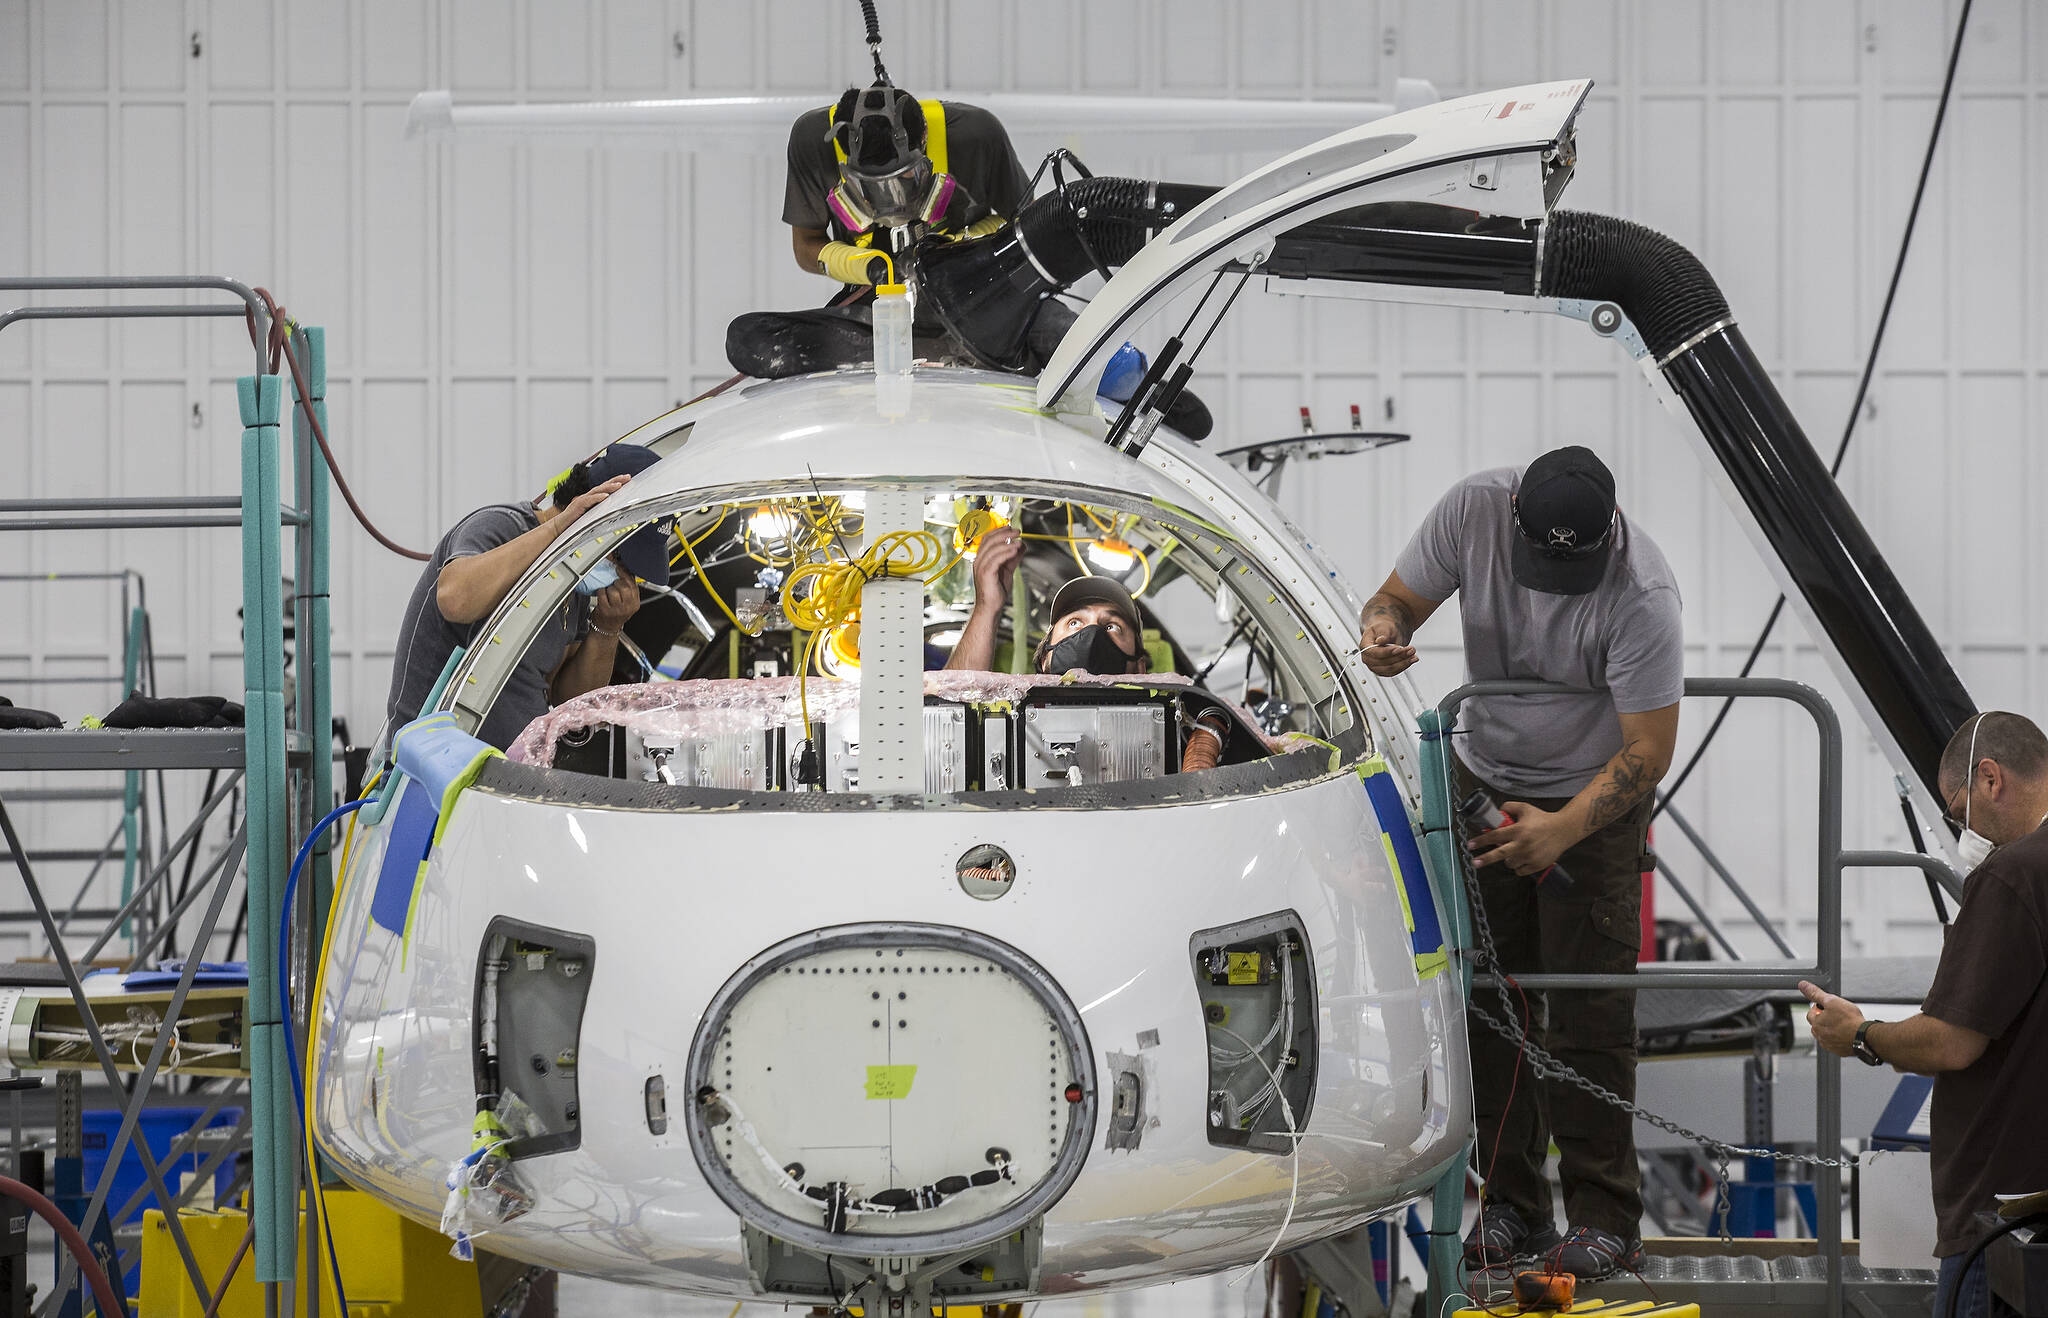 Workers build the first all-electric commuter plane, the Eviation Alice, at Eviation’s plant on Sept. 8, 2021 in Arlington. (Andy Bronson / The Herald)